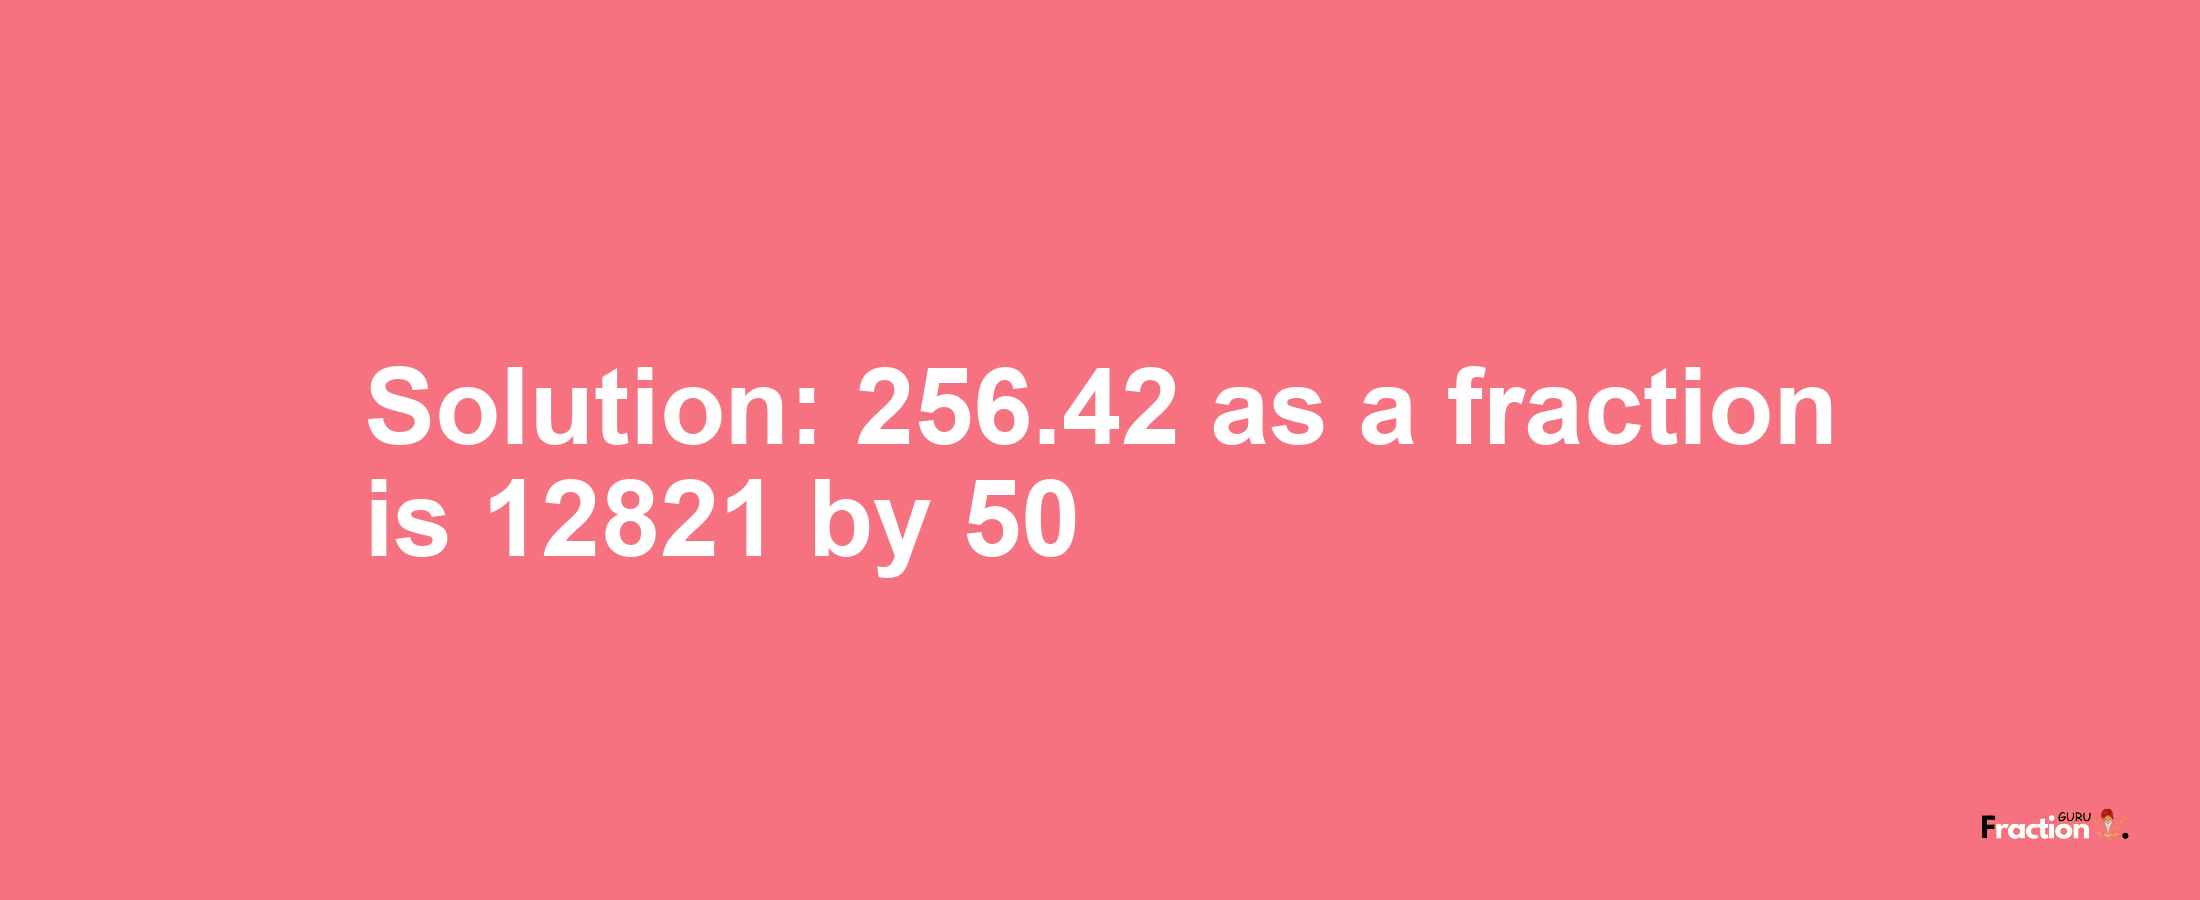 Solution:256.42 as a fraction is 12821/50